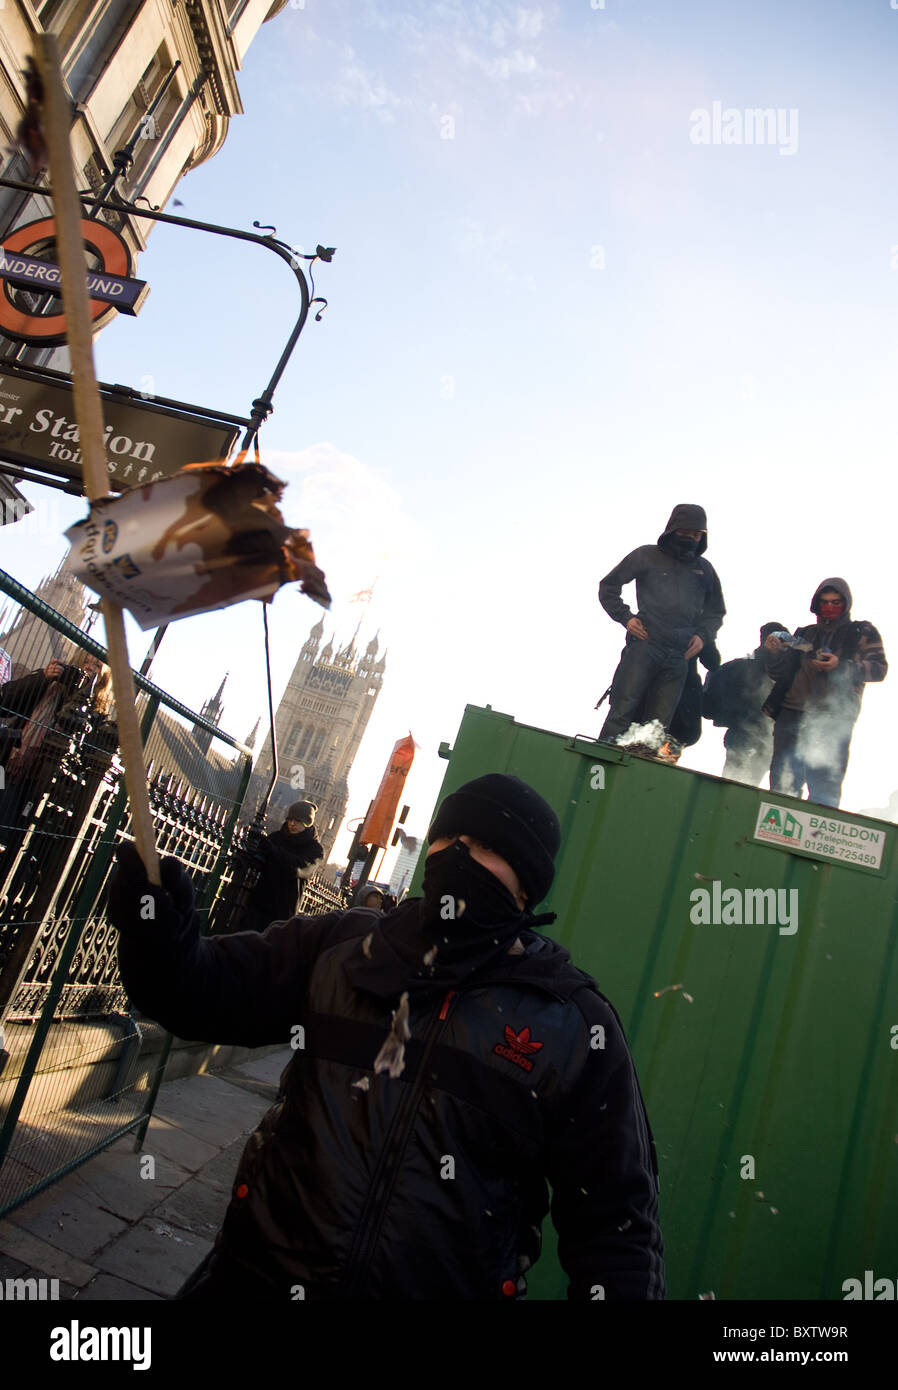 student protesters light a small fire on top of a container Stock Photo